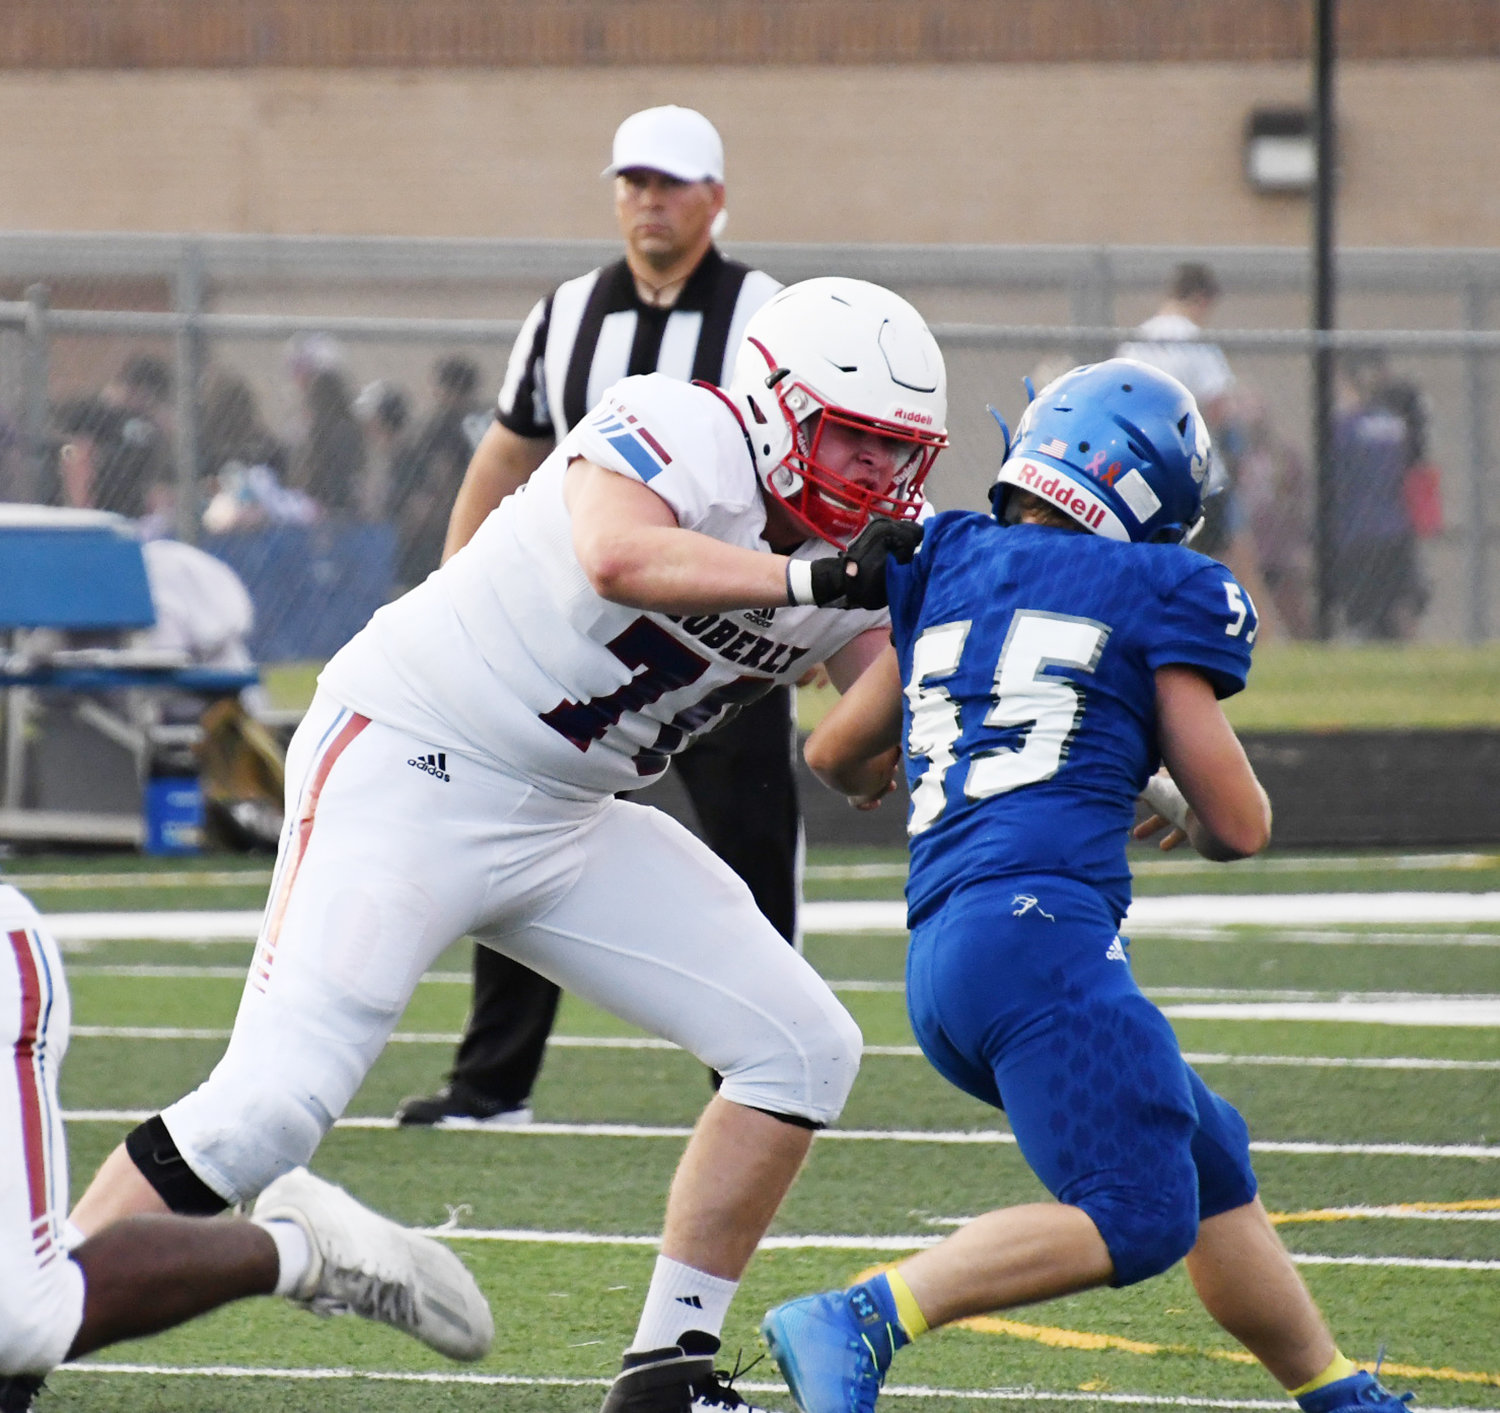 Devin Snow (70) of Moberly controls the line of scrimmage with this block.